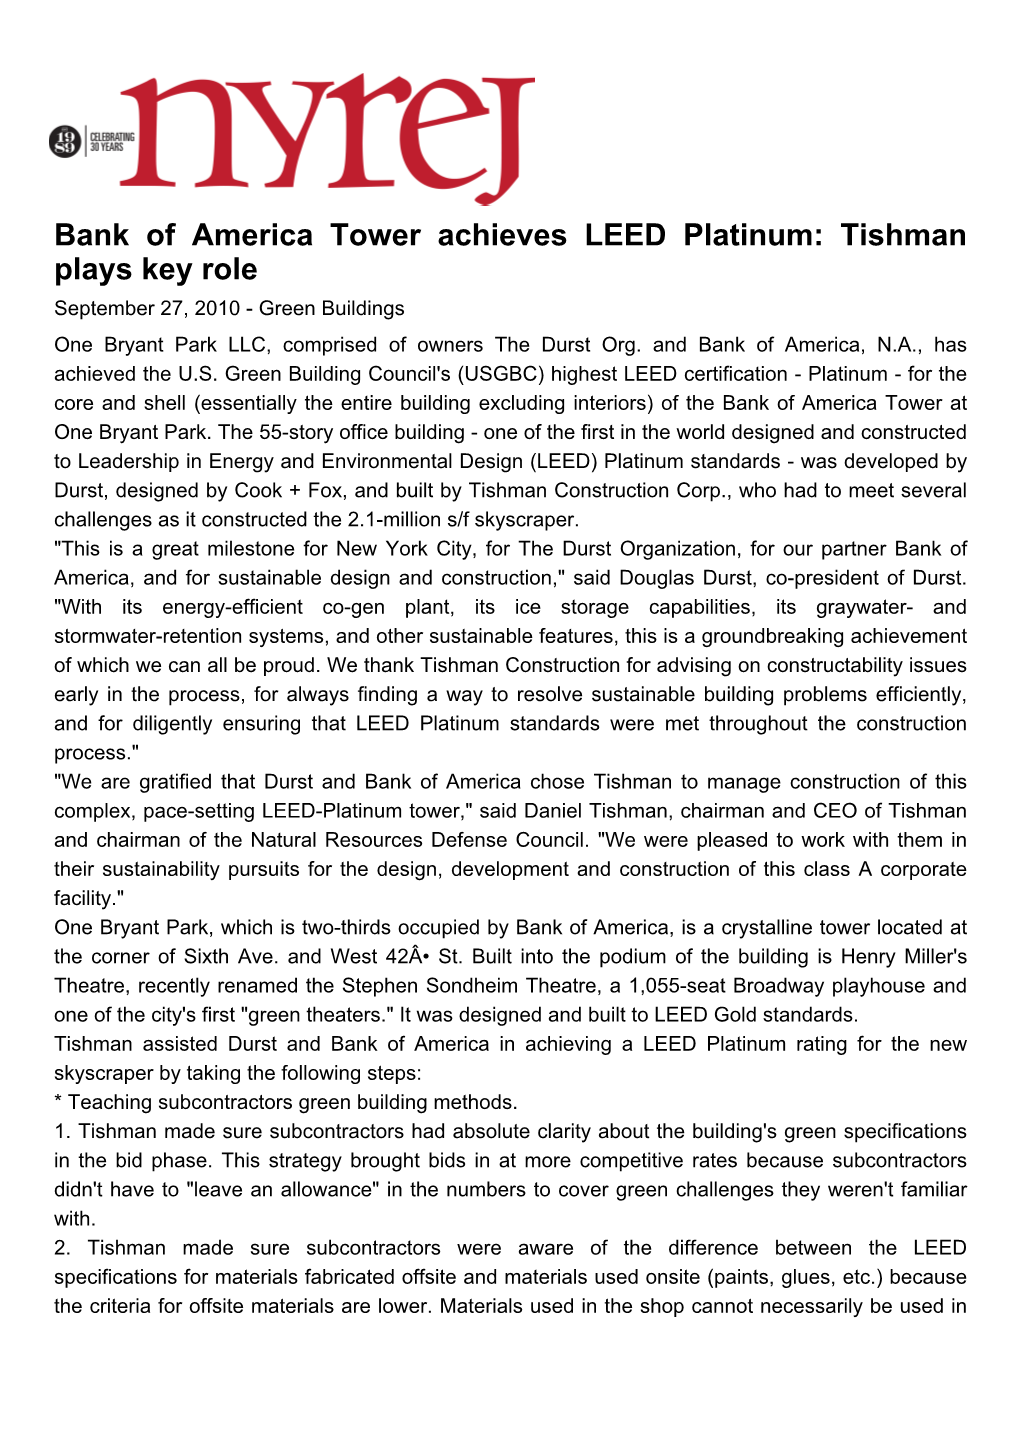 Bank of America Tower Achieves LEED Platinum: Tishman Plays Key Role September 27, 2010 - Green Buildings One Bryant Park LLC, Comprised of Owners the Durst Org